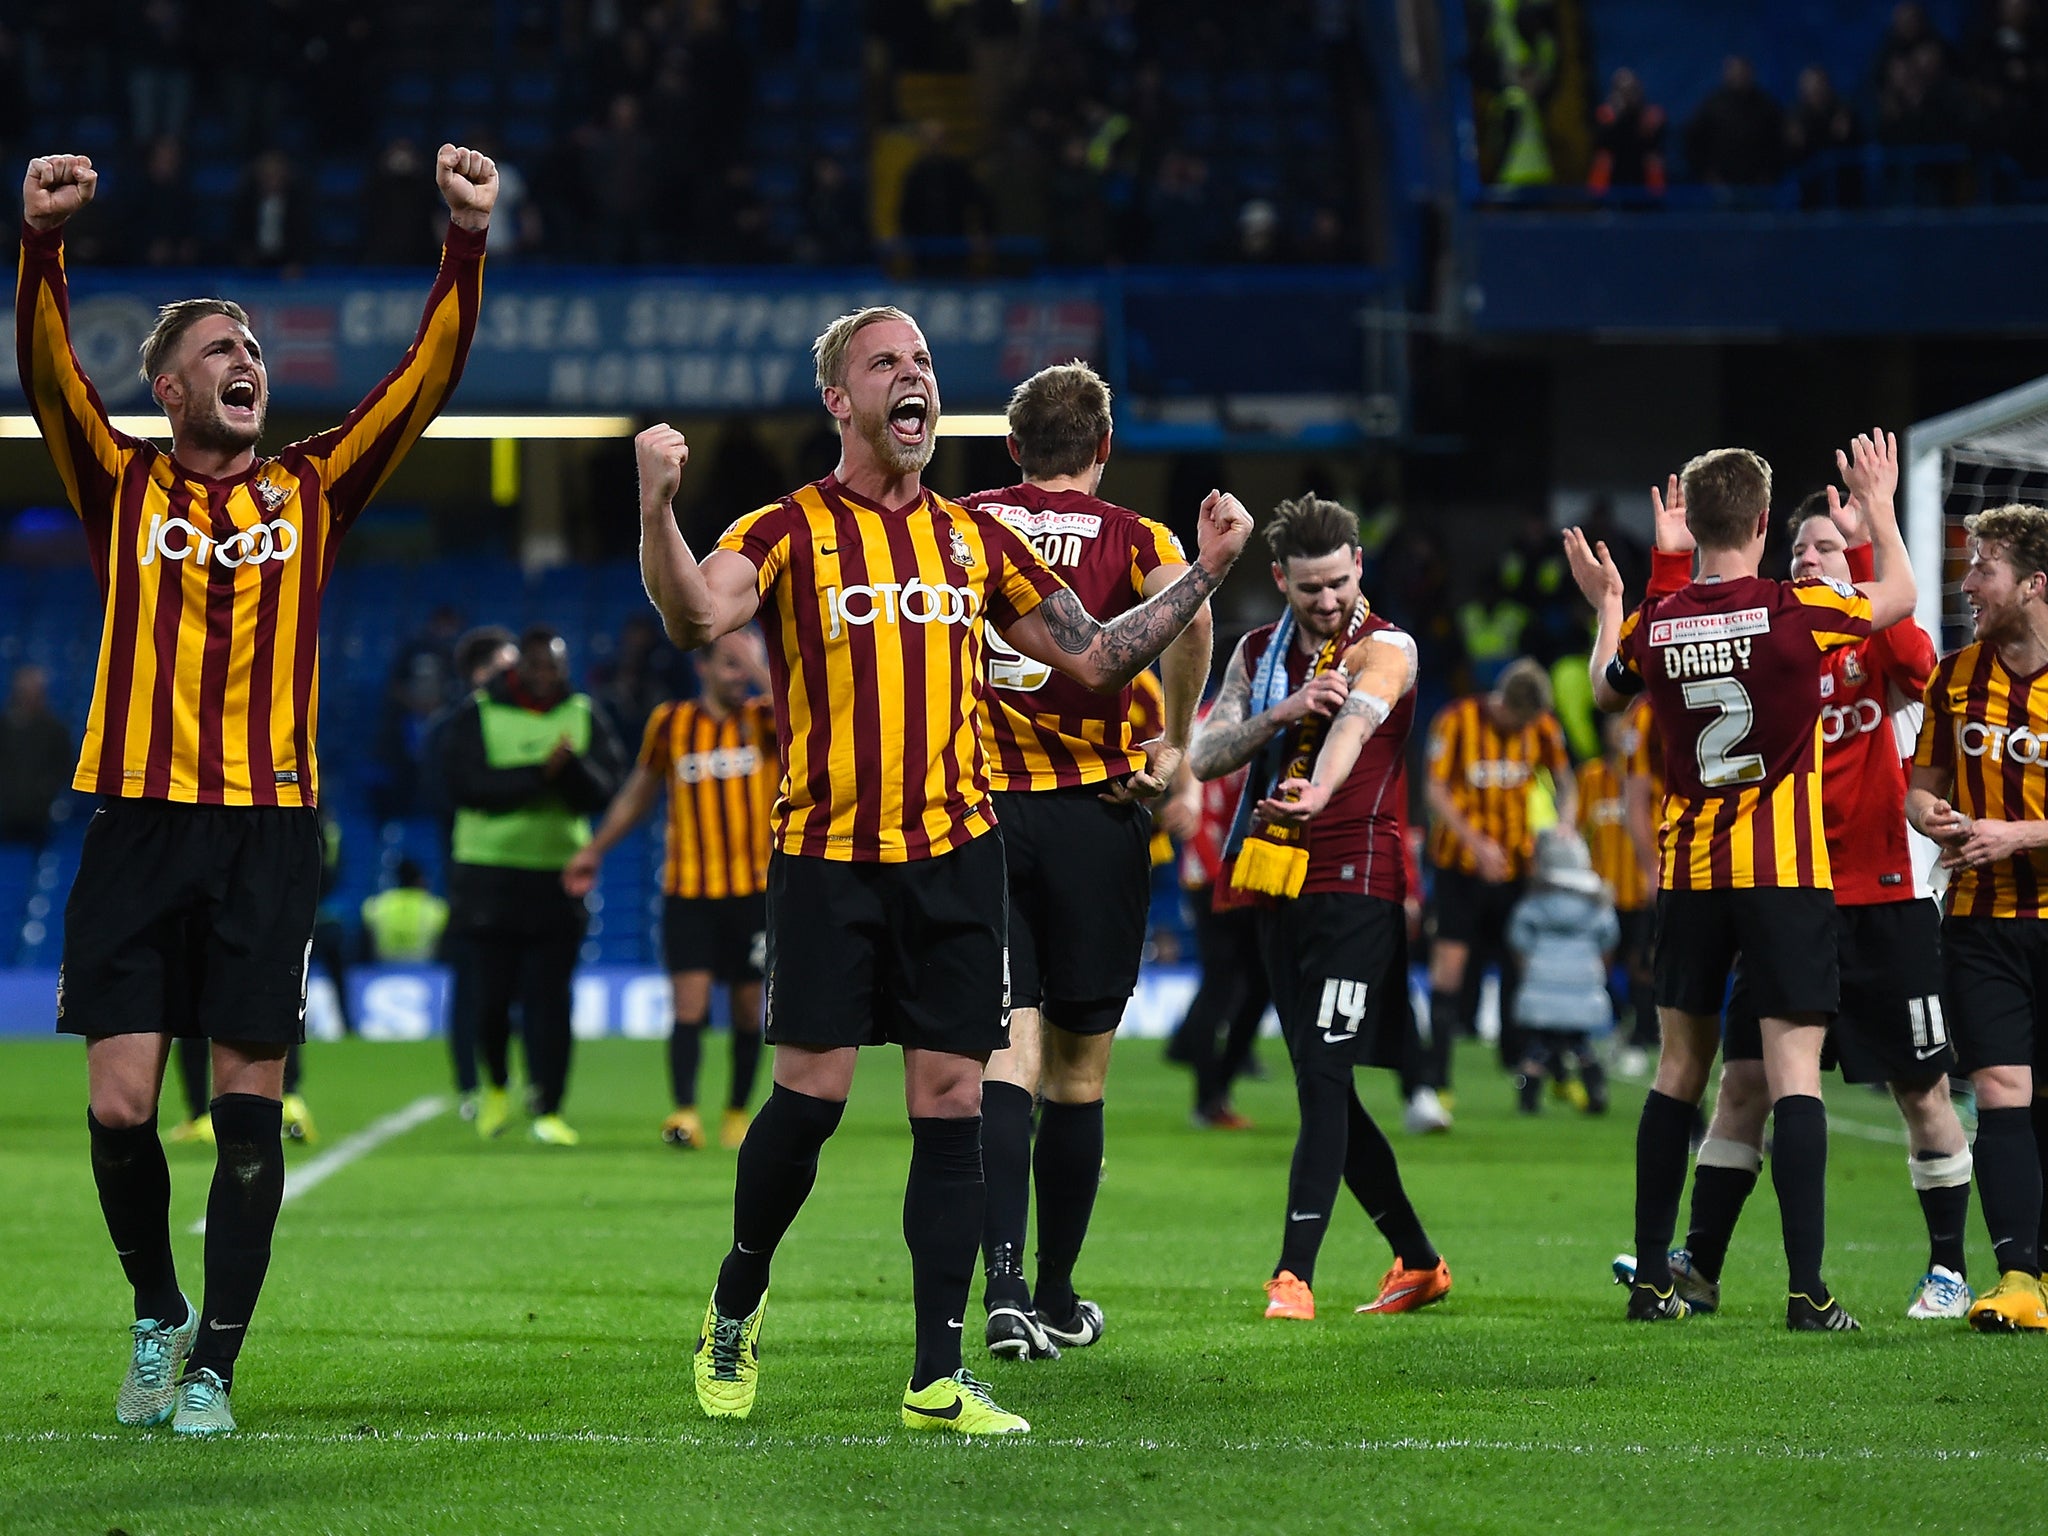 Bradford City's reward for their memorable win over Chelsea is a trip to face either Sunderland or Fulham (Getty)